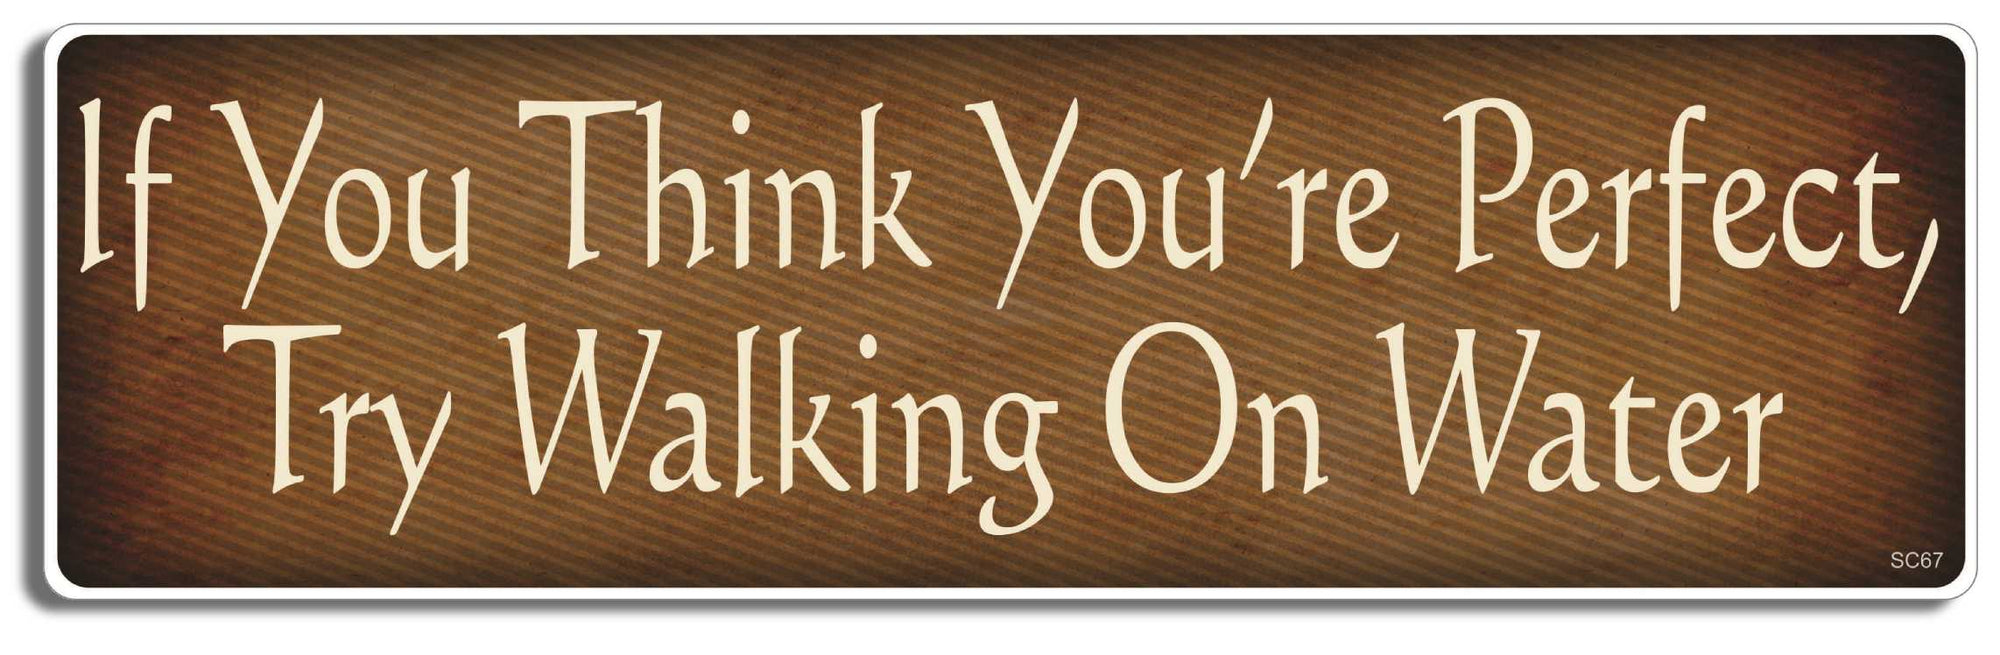 If you think you're perfect, try walking on water - 3" x 10" Bumper Sticker--Car Magnet- -  Decal Bumper Sticker-political Bumper Sticker Car Magnet If you think you're perfect, try-  Decal for carschristian, jesus